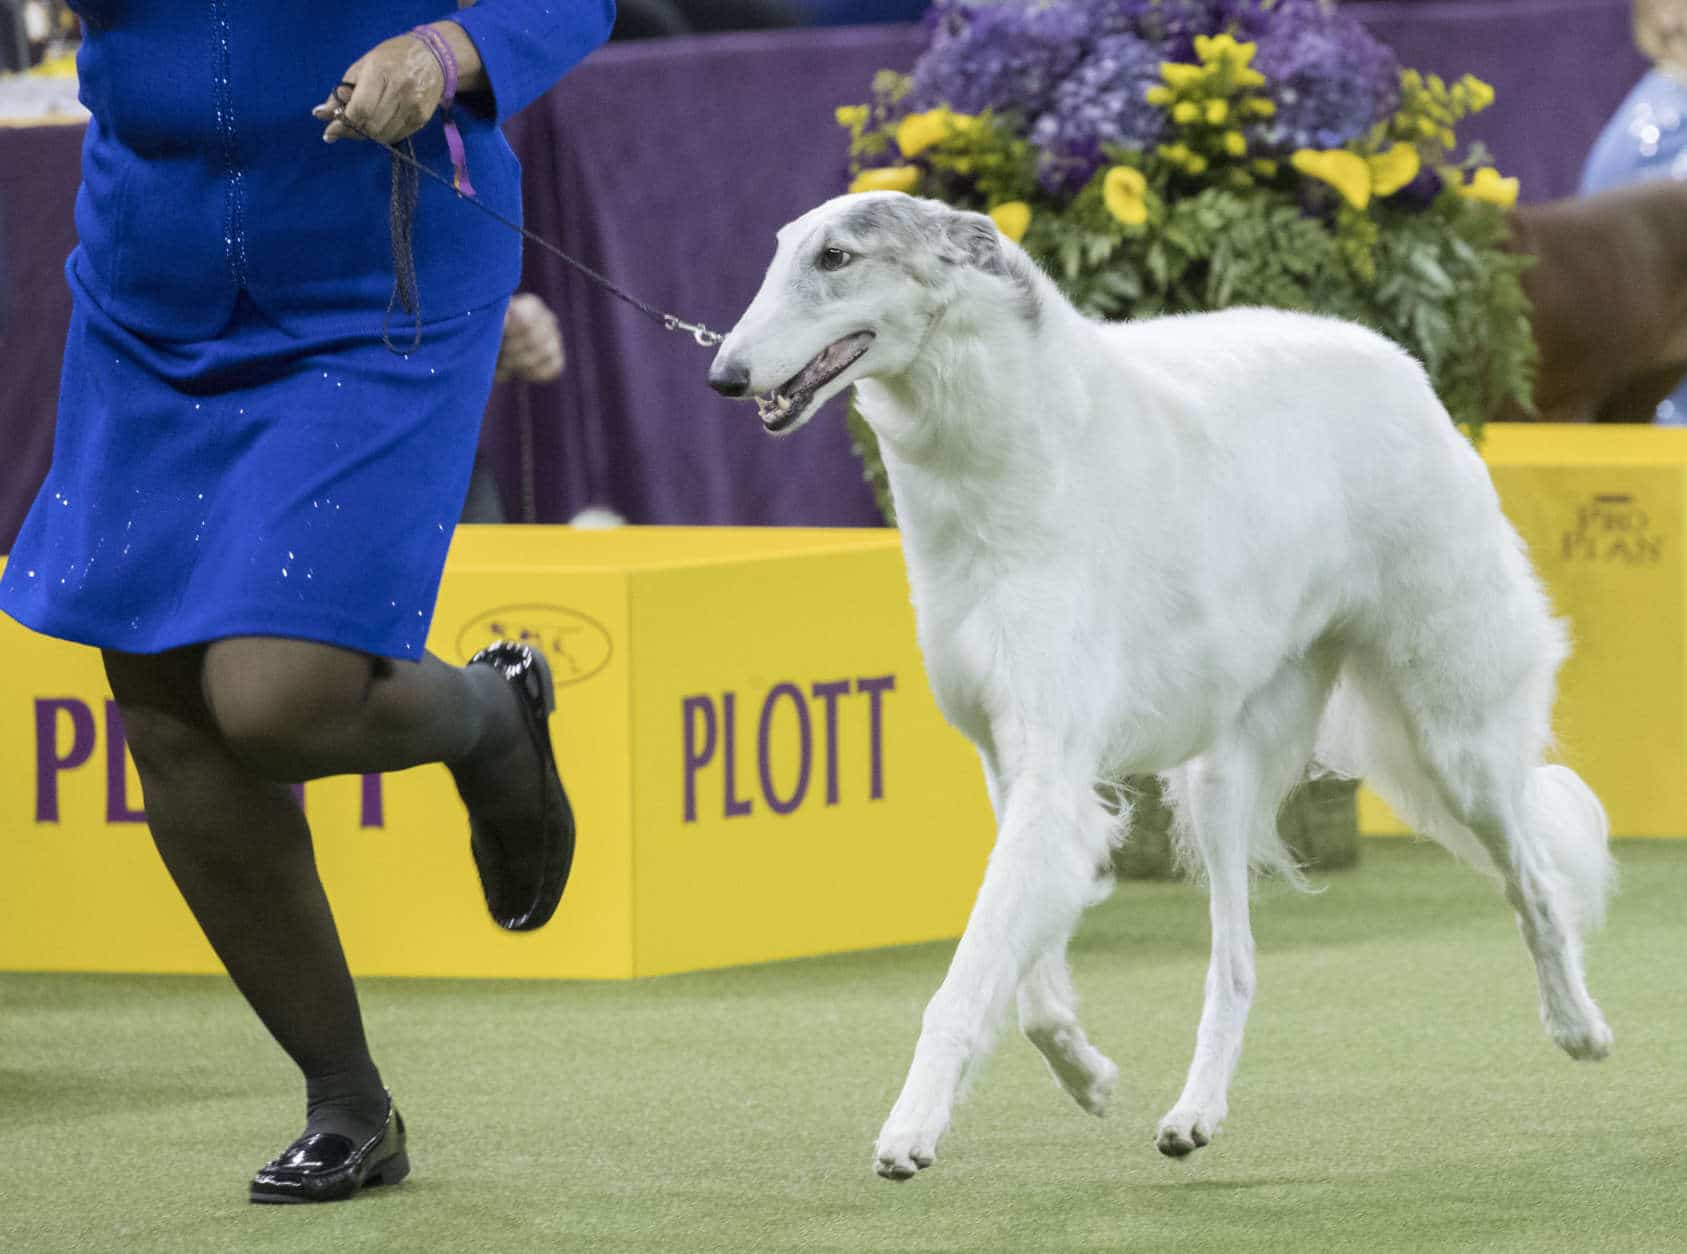 Lucy, a borzoi, is shown in the ring during the Hound group competition during the 142nd Westminster Kennel Club Dog Show, Monday, Feb. 12, 2018, at Madison Square Garden in New York. Lucy won best in group. (AP Photo/Mary Altaffer)